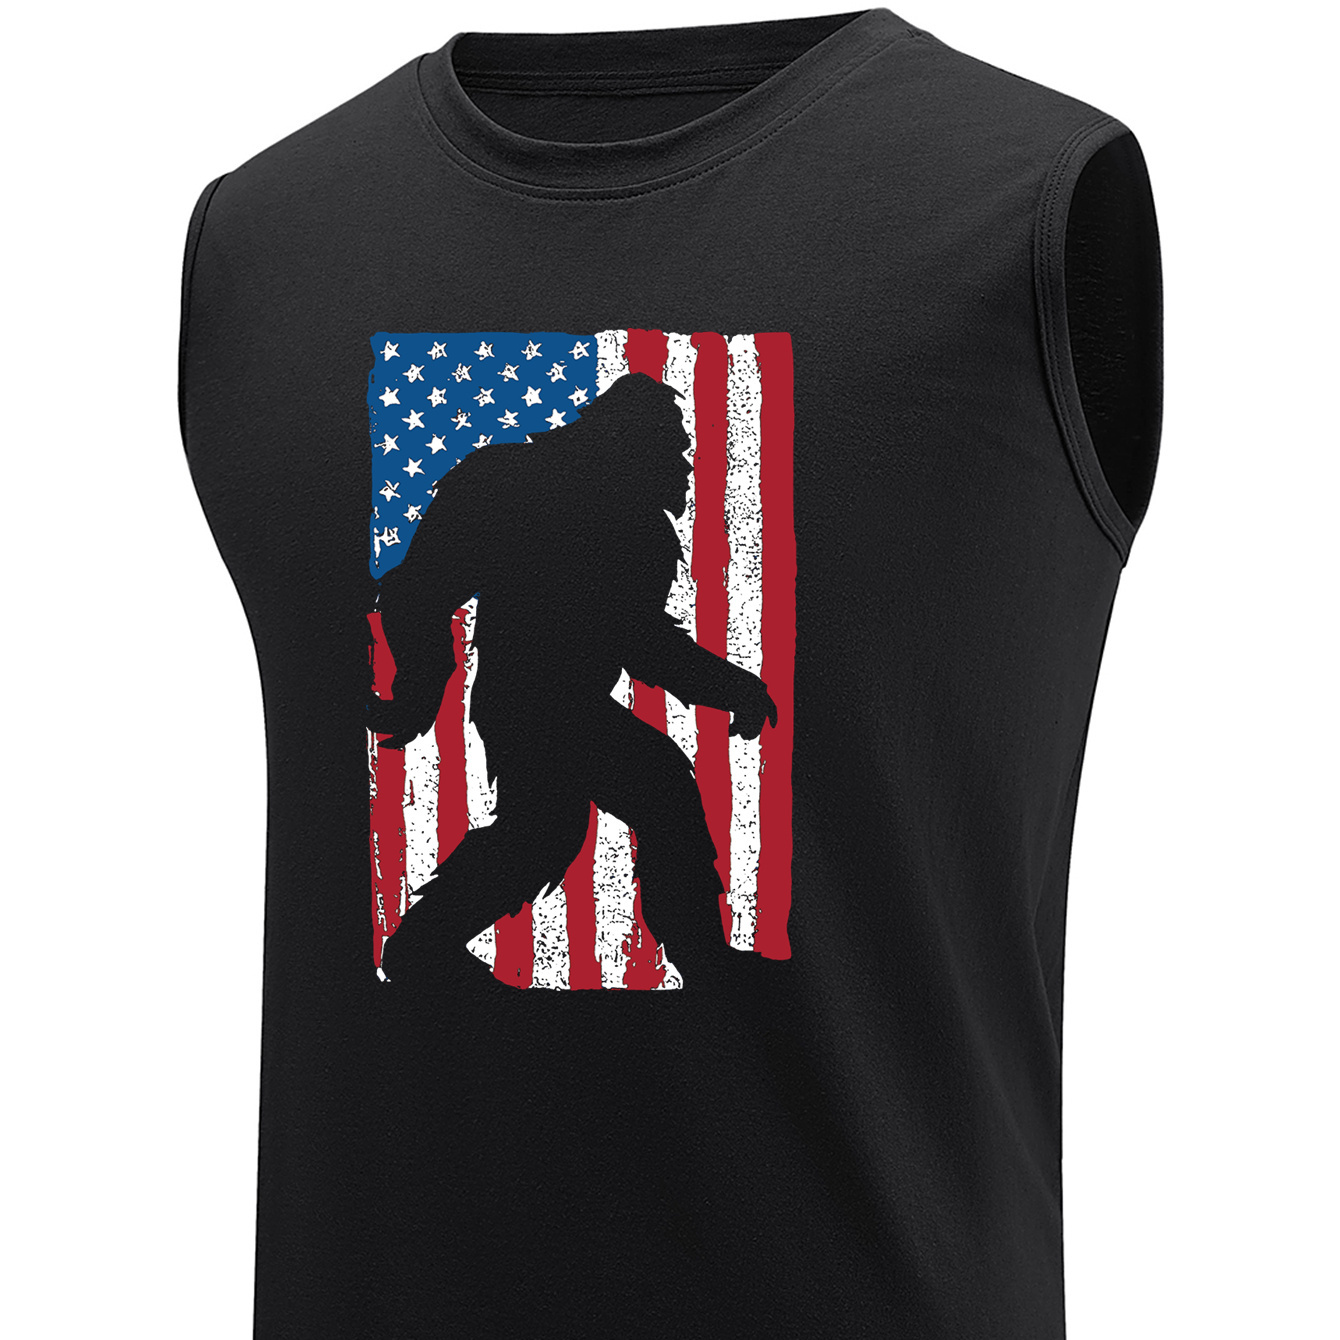 

Plus Size Men's Gorilla & Us Flag Graphic Print Tank Top, Breathable Sleeveless Tees For Sports/fitness